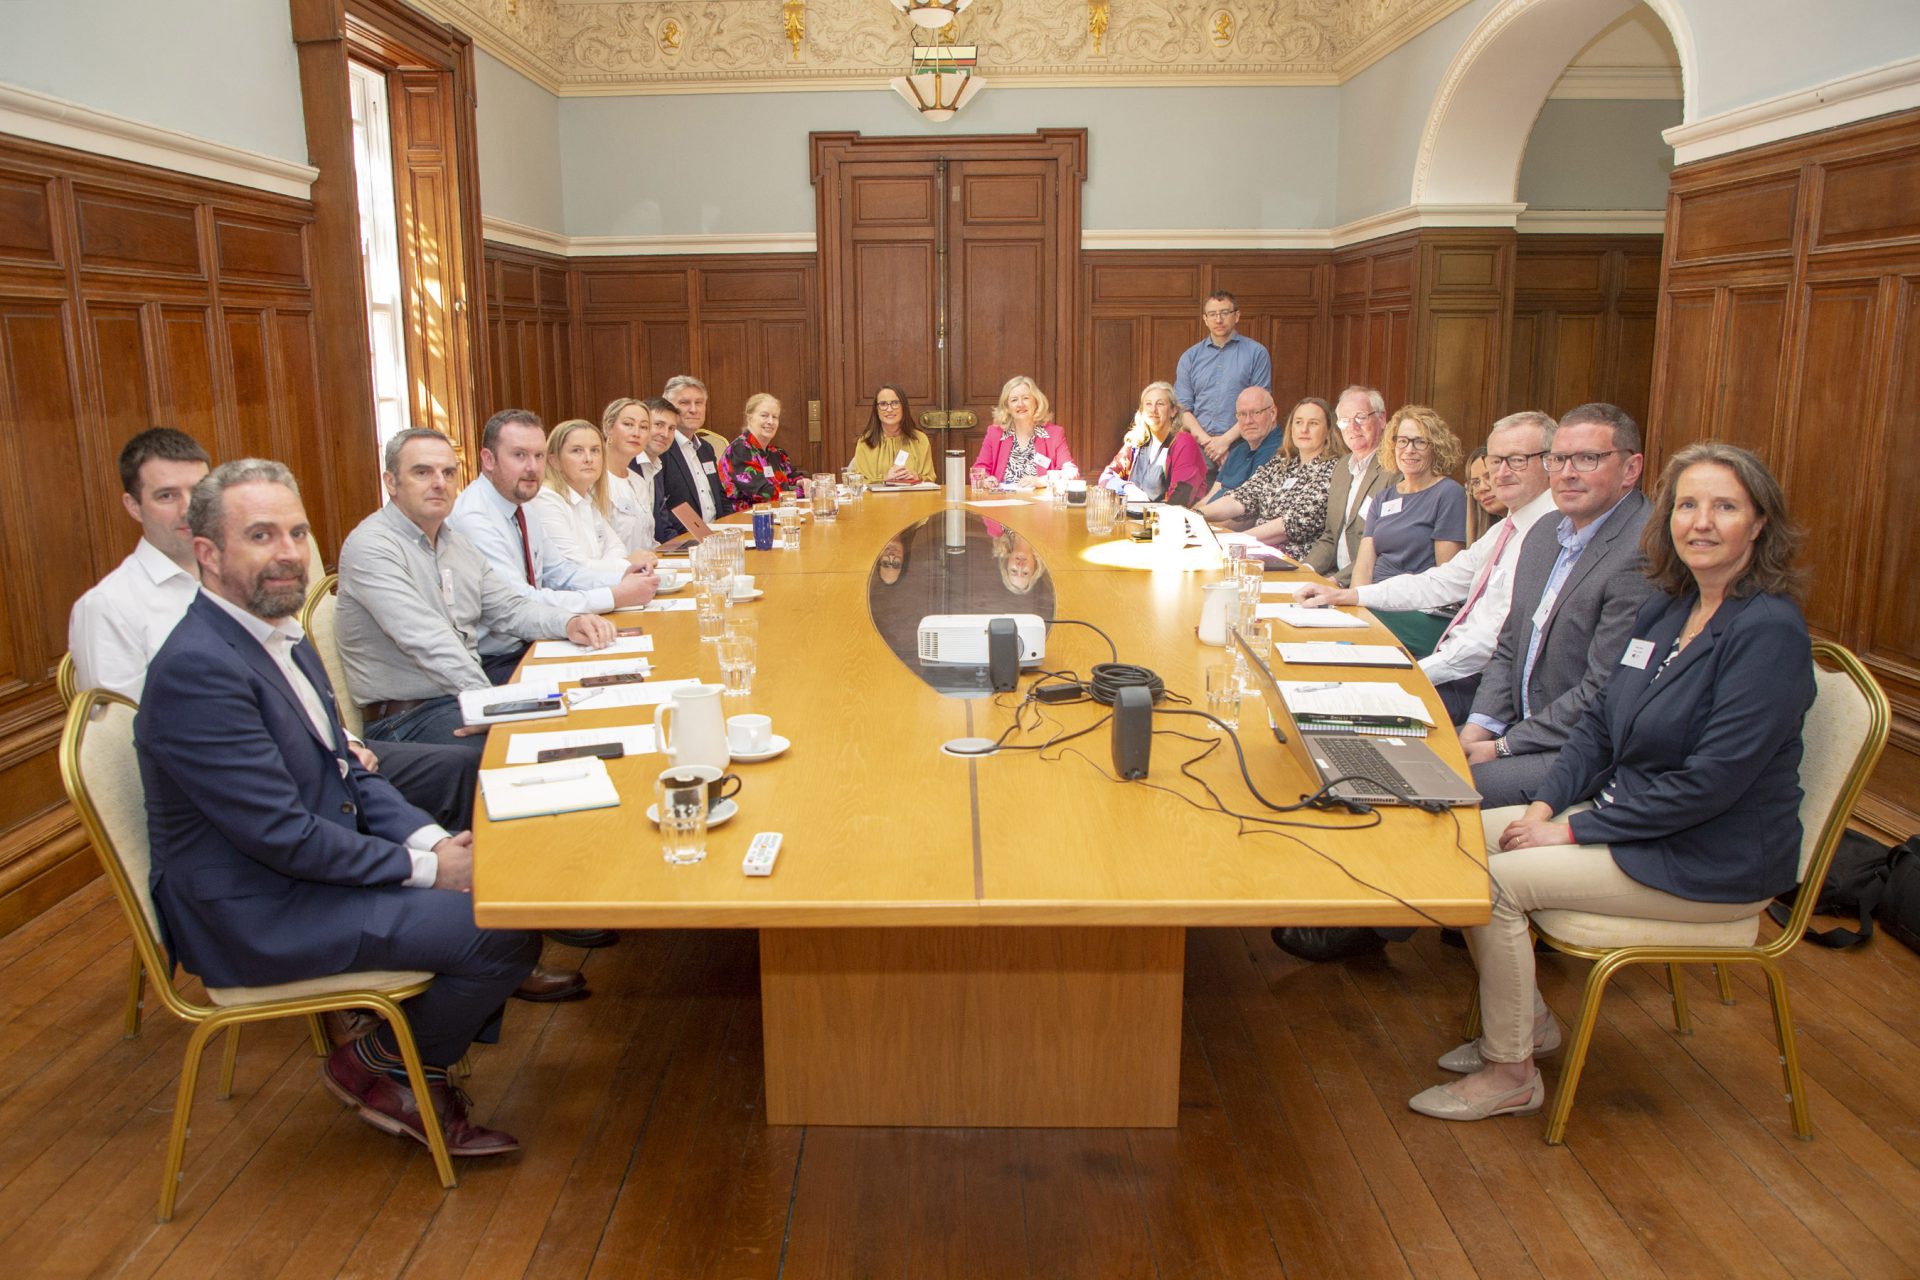 Wicklow County Council Hosts Roundtable Discussion on the Gig Economy in the Screen Sector